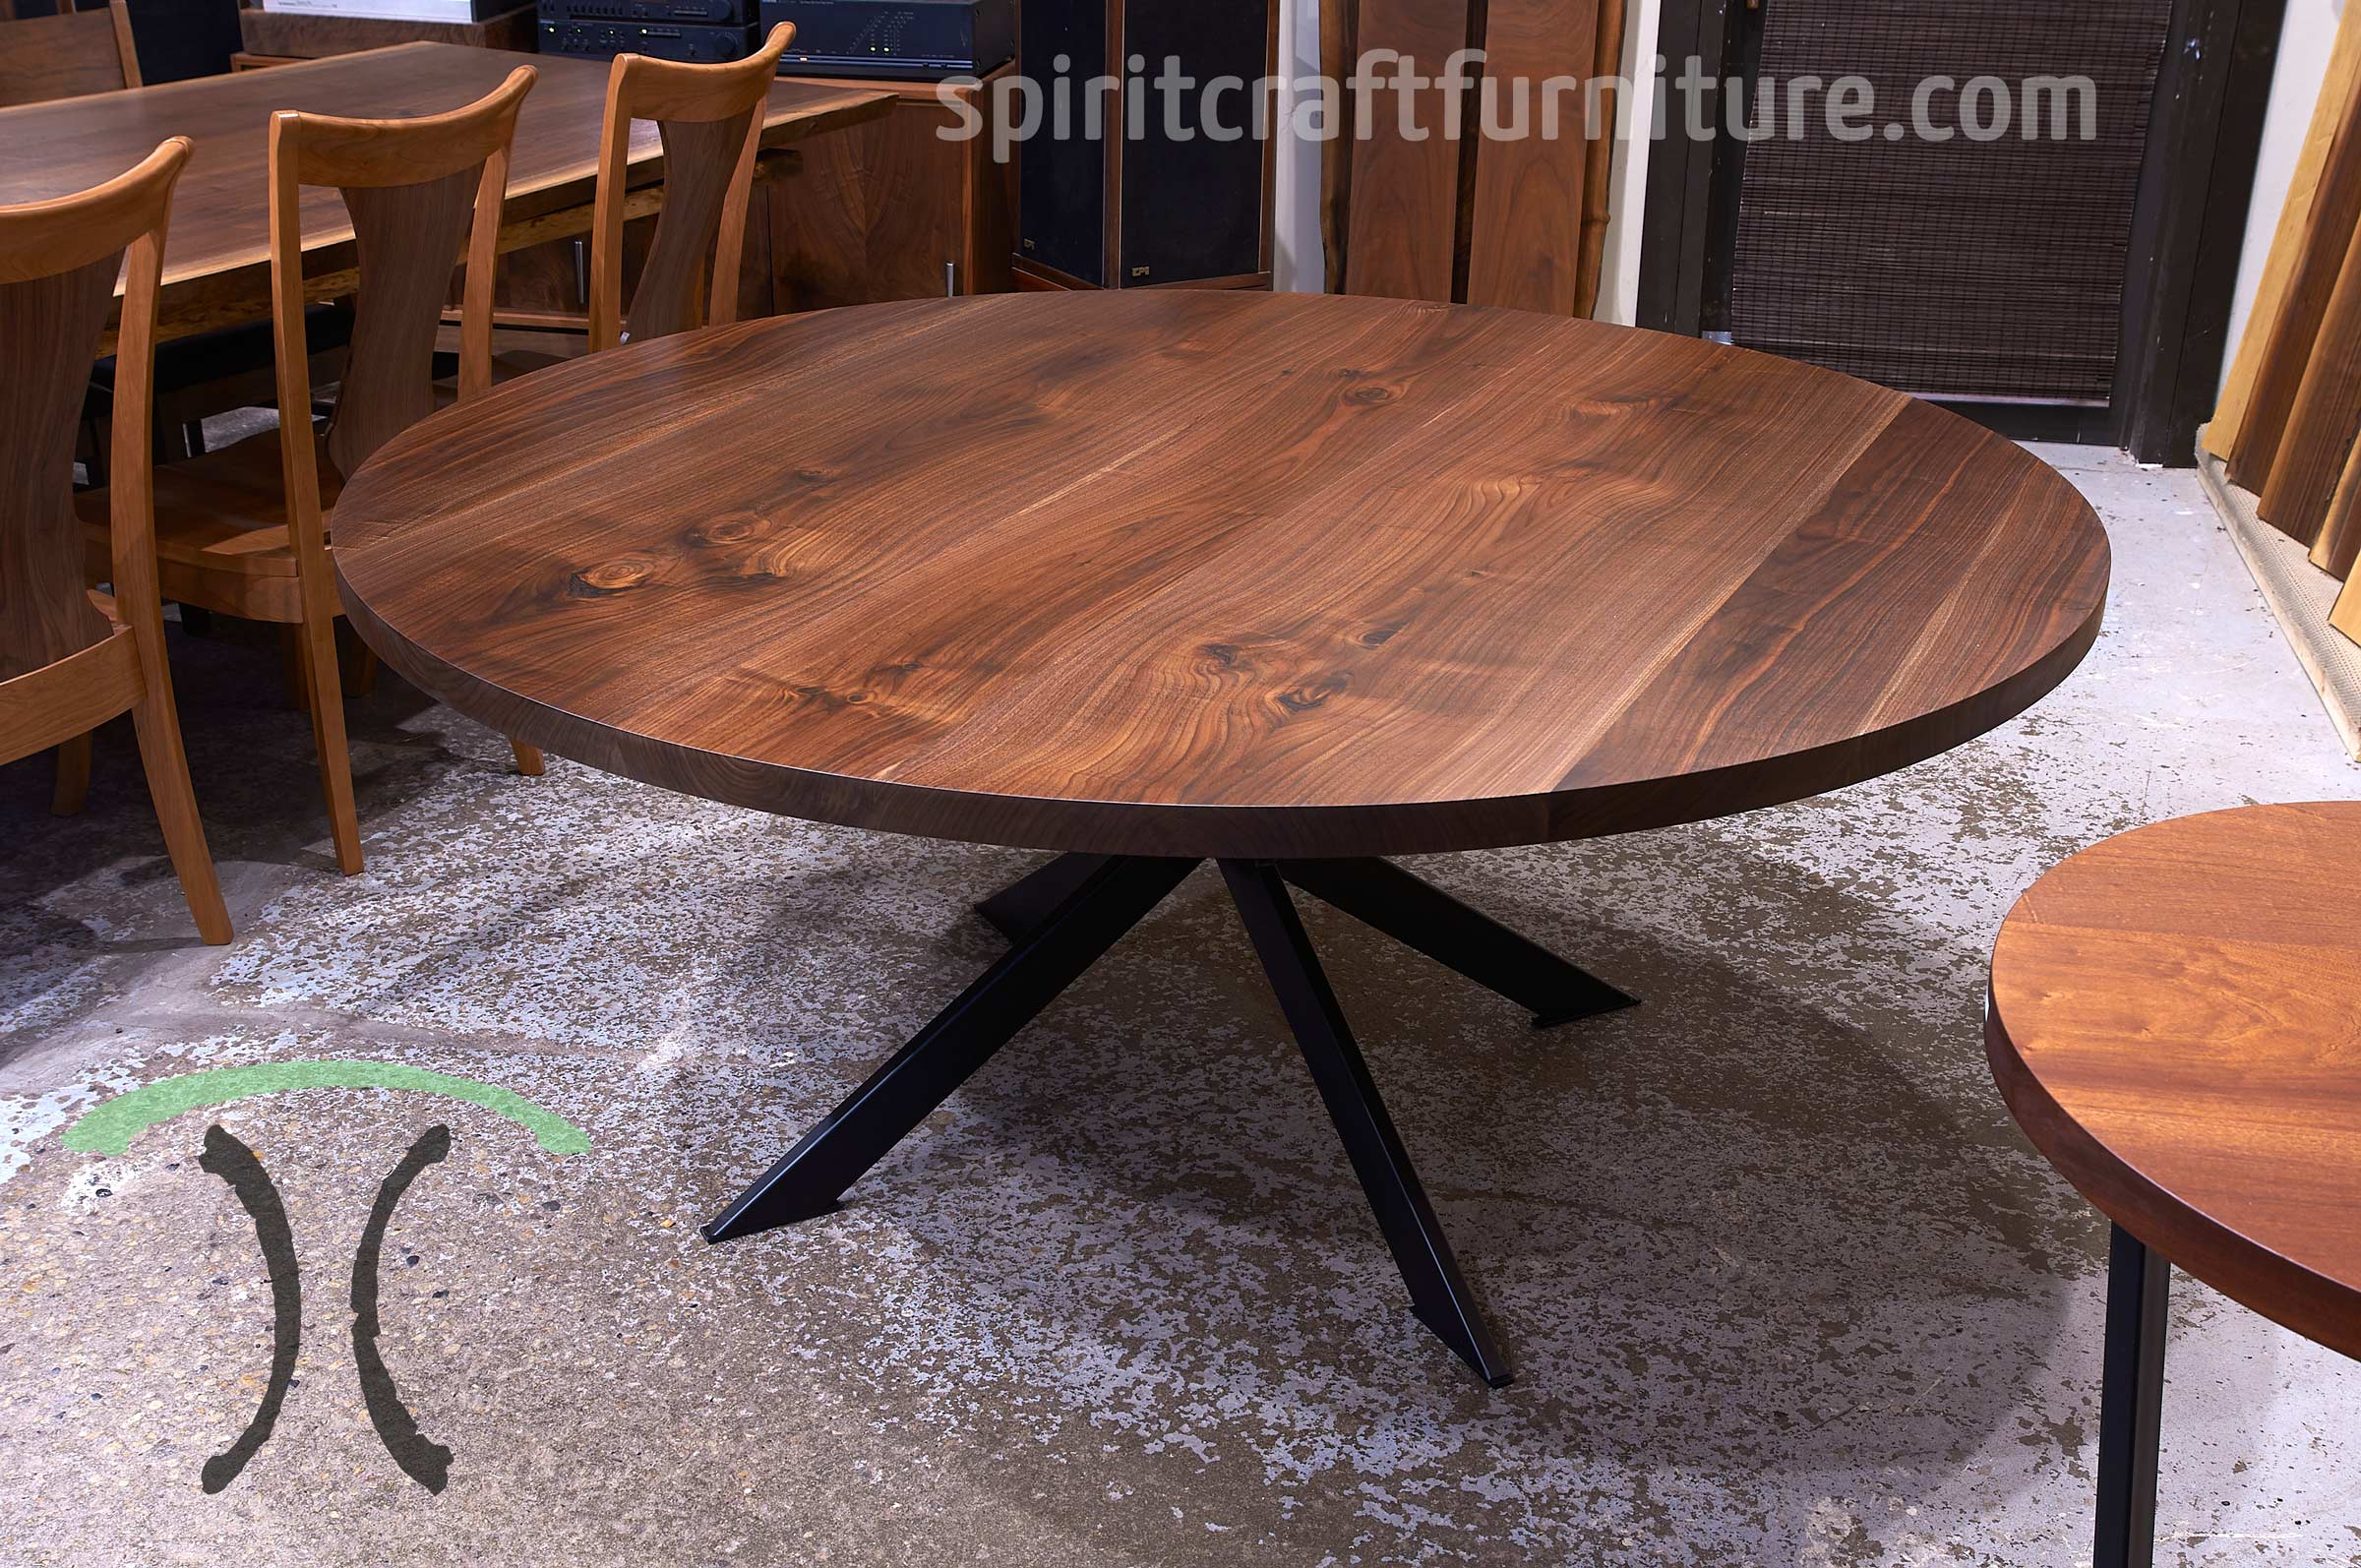 Wood Slab Conference Room Tables, 72 Round Conference Table